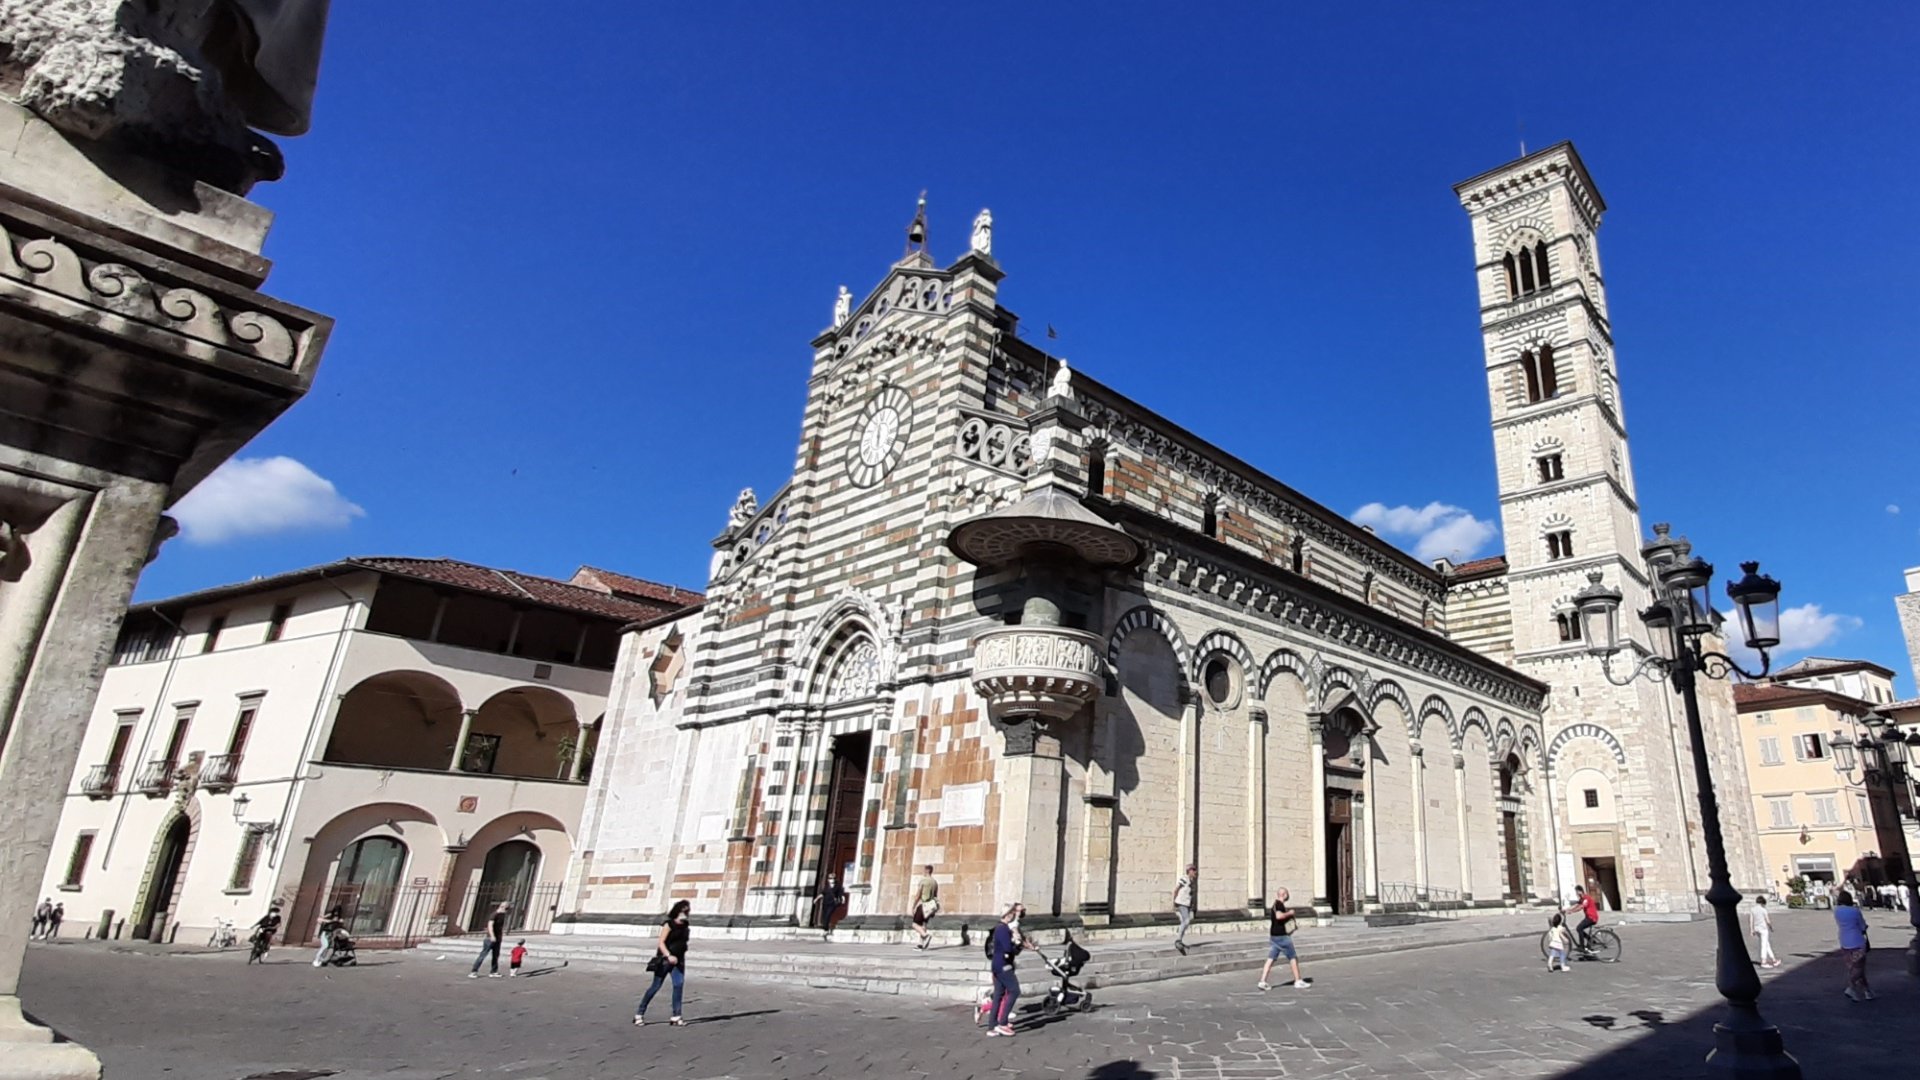 An enjoyable walking tour to discover the main attractions of Prato and its Cantuccini biscuits